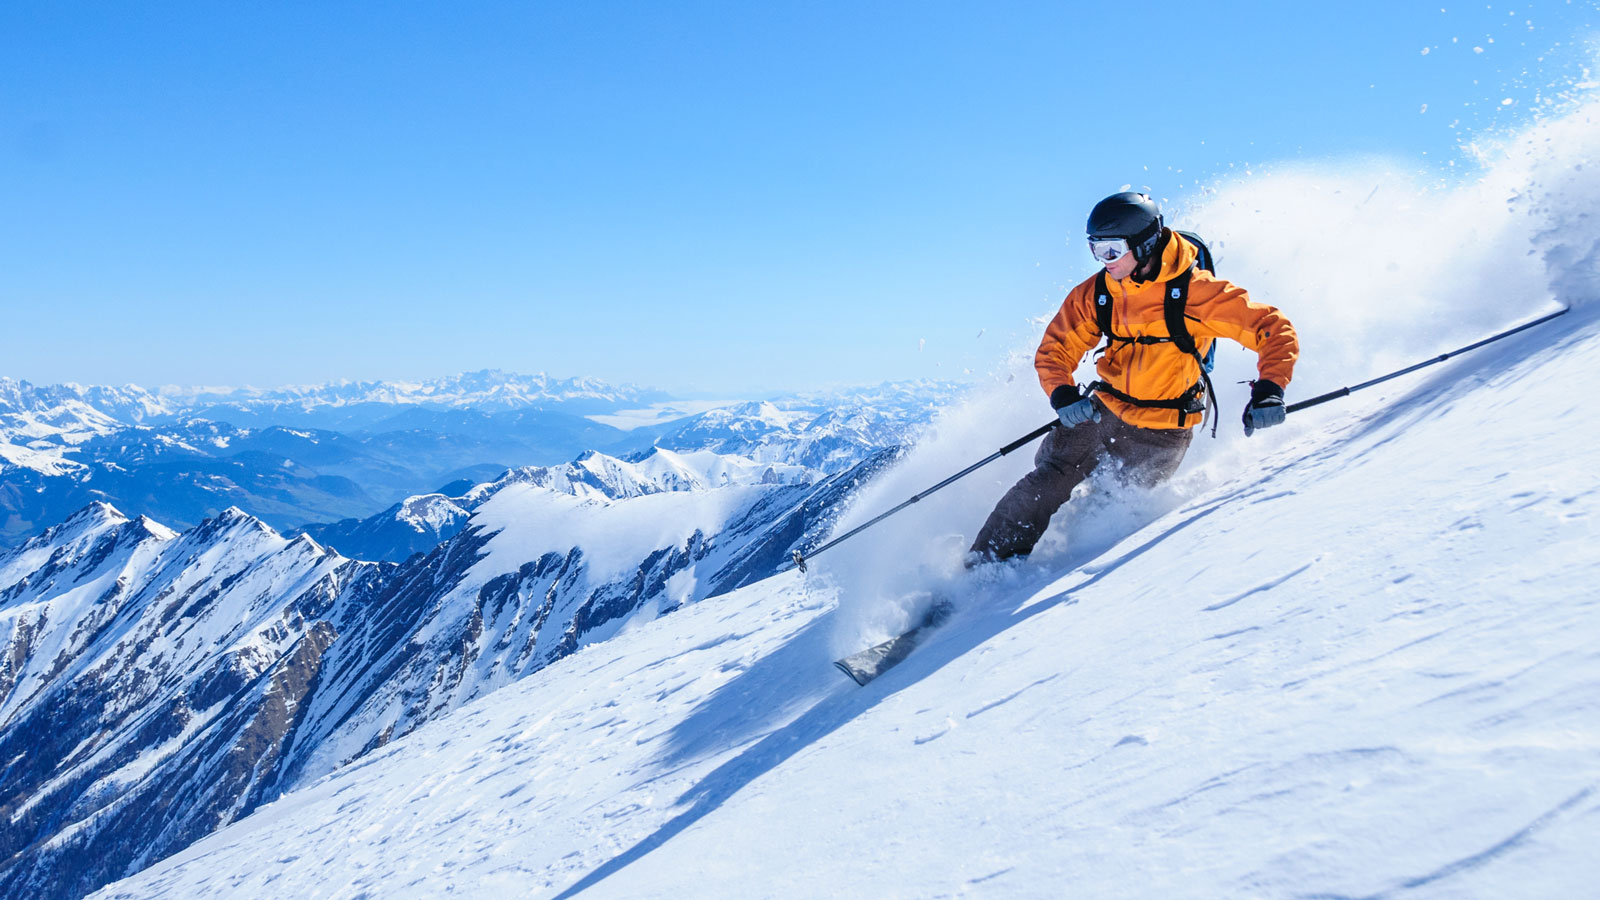 Skier in bright orange jacket making a sharp turn on a steep snow-covered slope with a spectacular panoramic view of alpine peaks in the background, highlighting an action-packed skiing adventure.